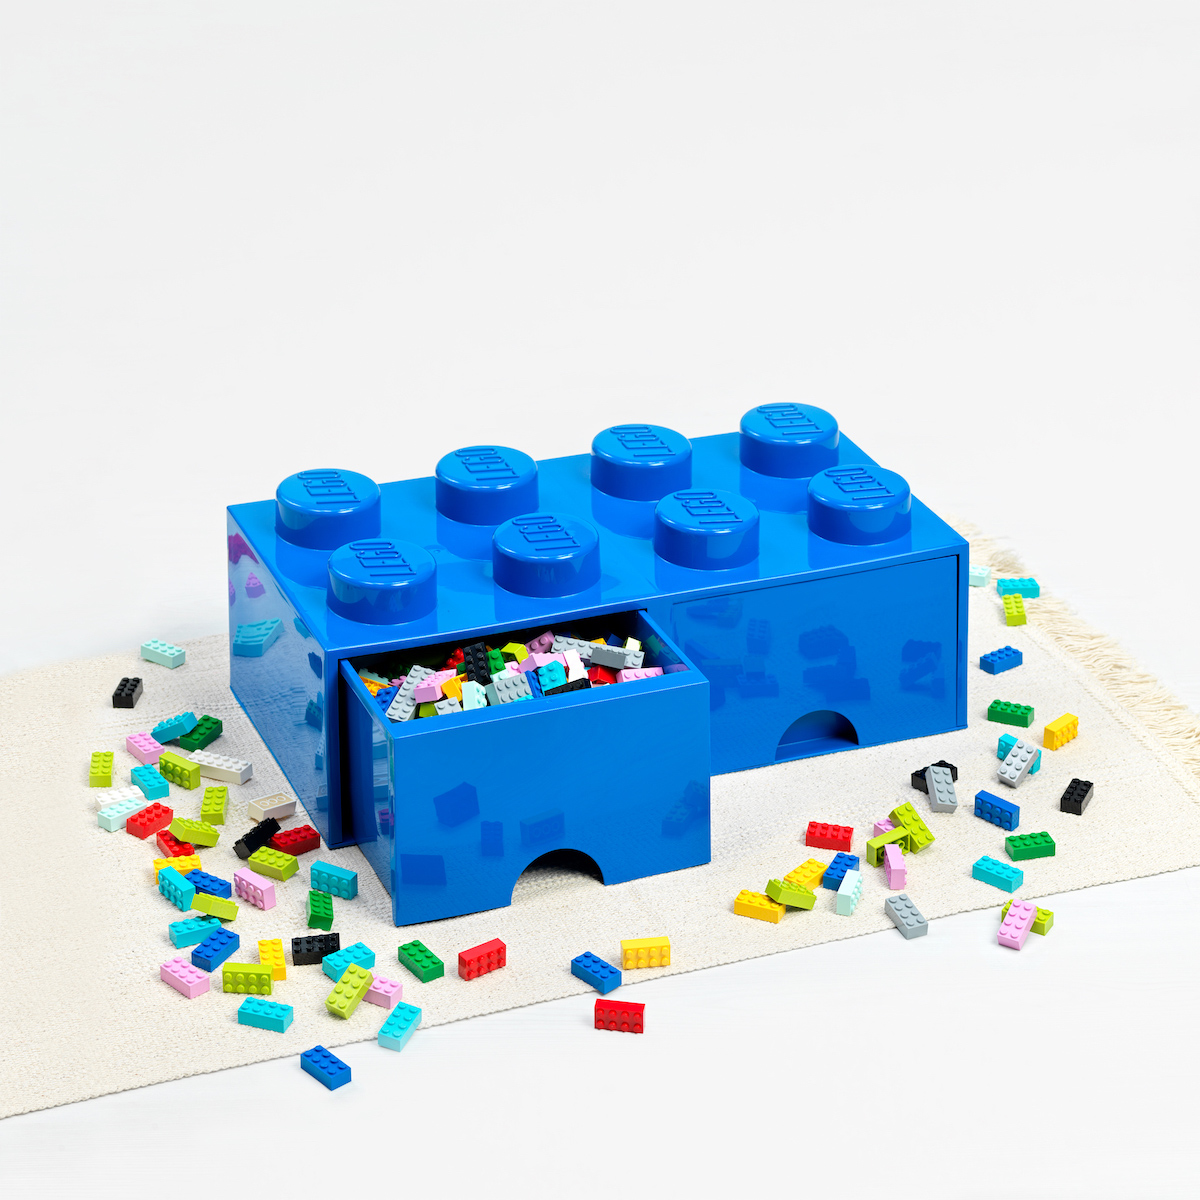 LEGO Classic Box With 8 Knobs in Light Royal Blue Room Copenhagen Toy 